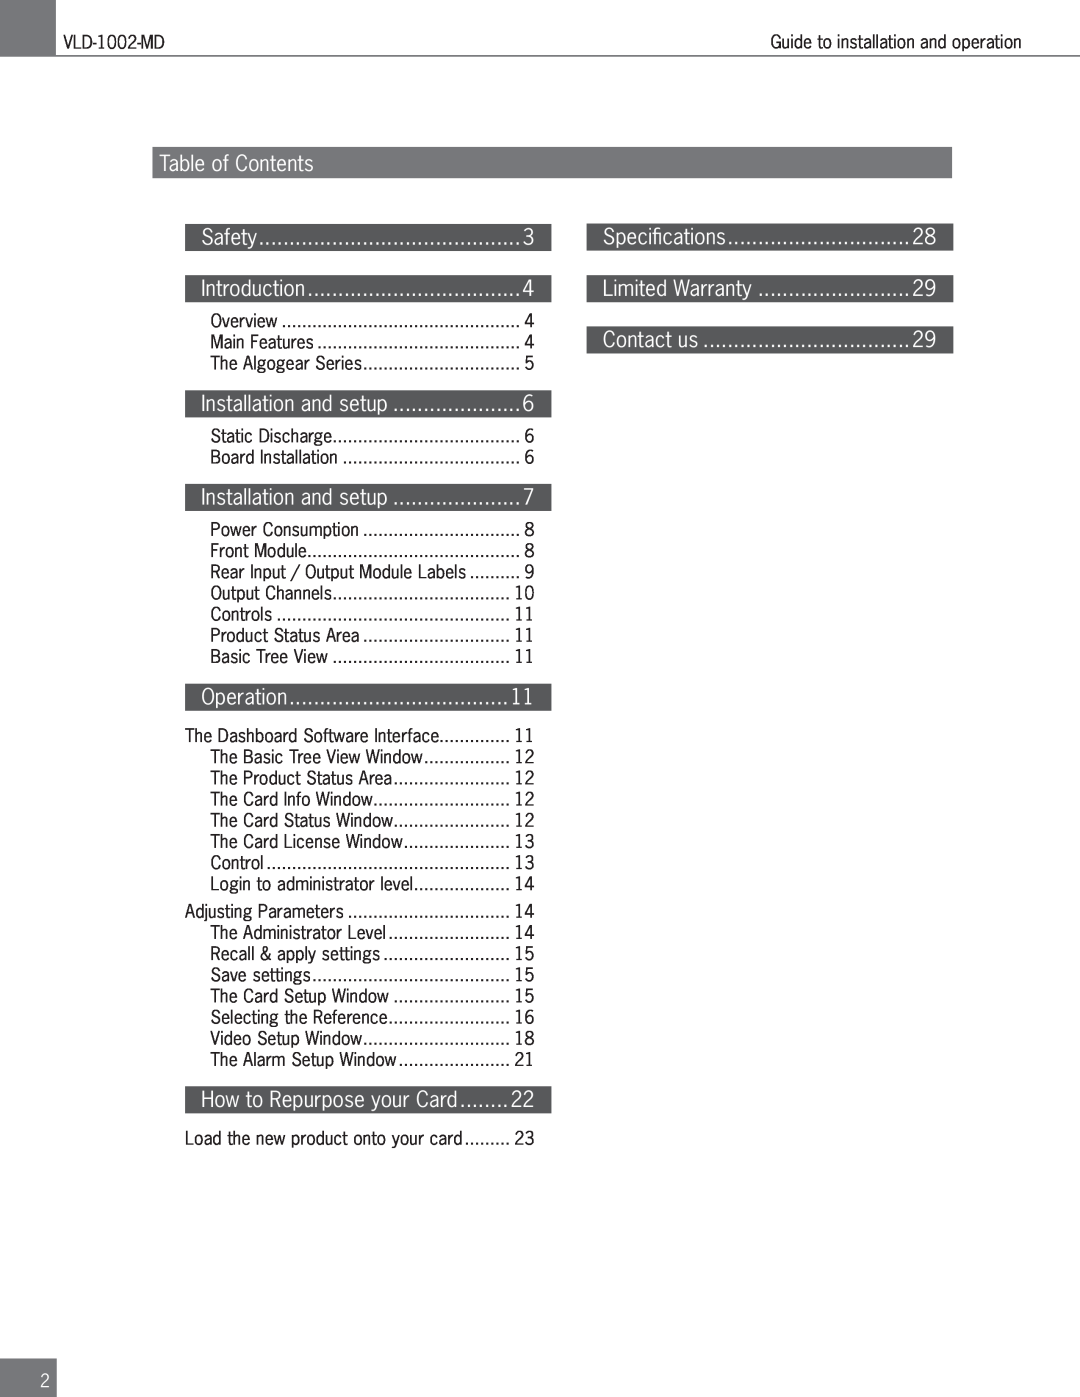 Algolith VLD-1002-MD operation manual Table of Contents 